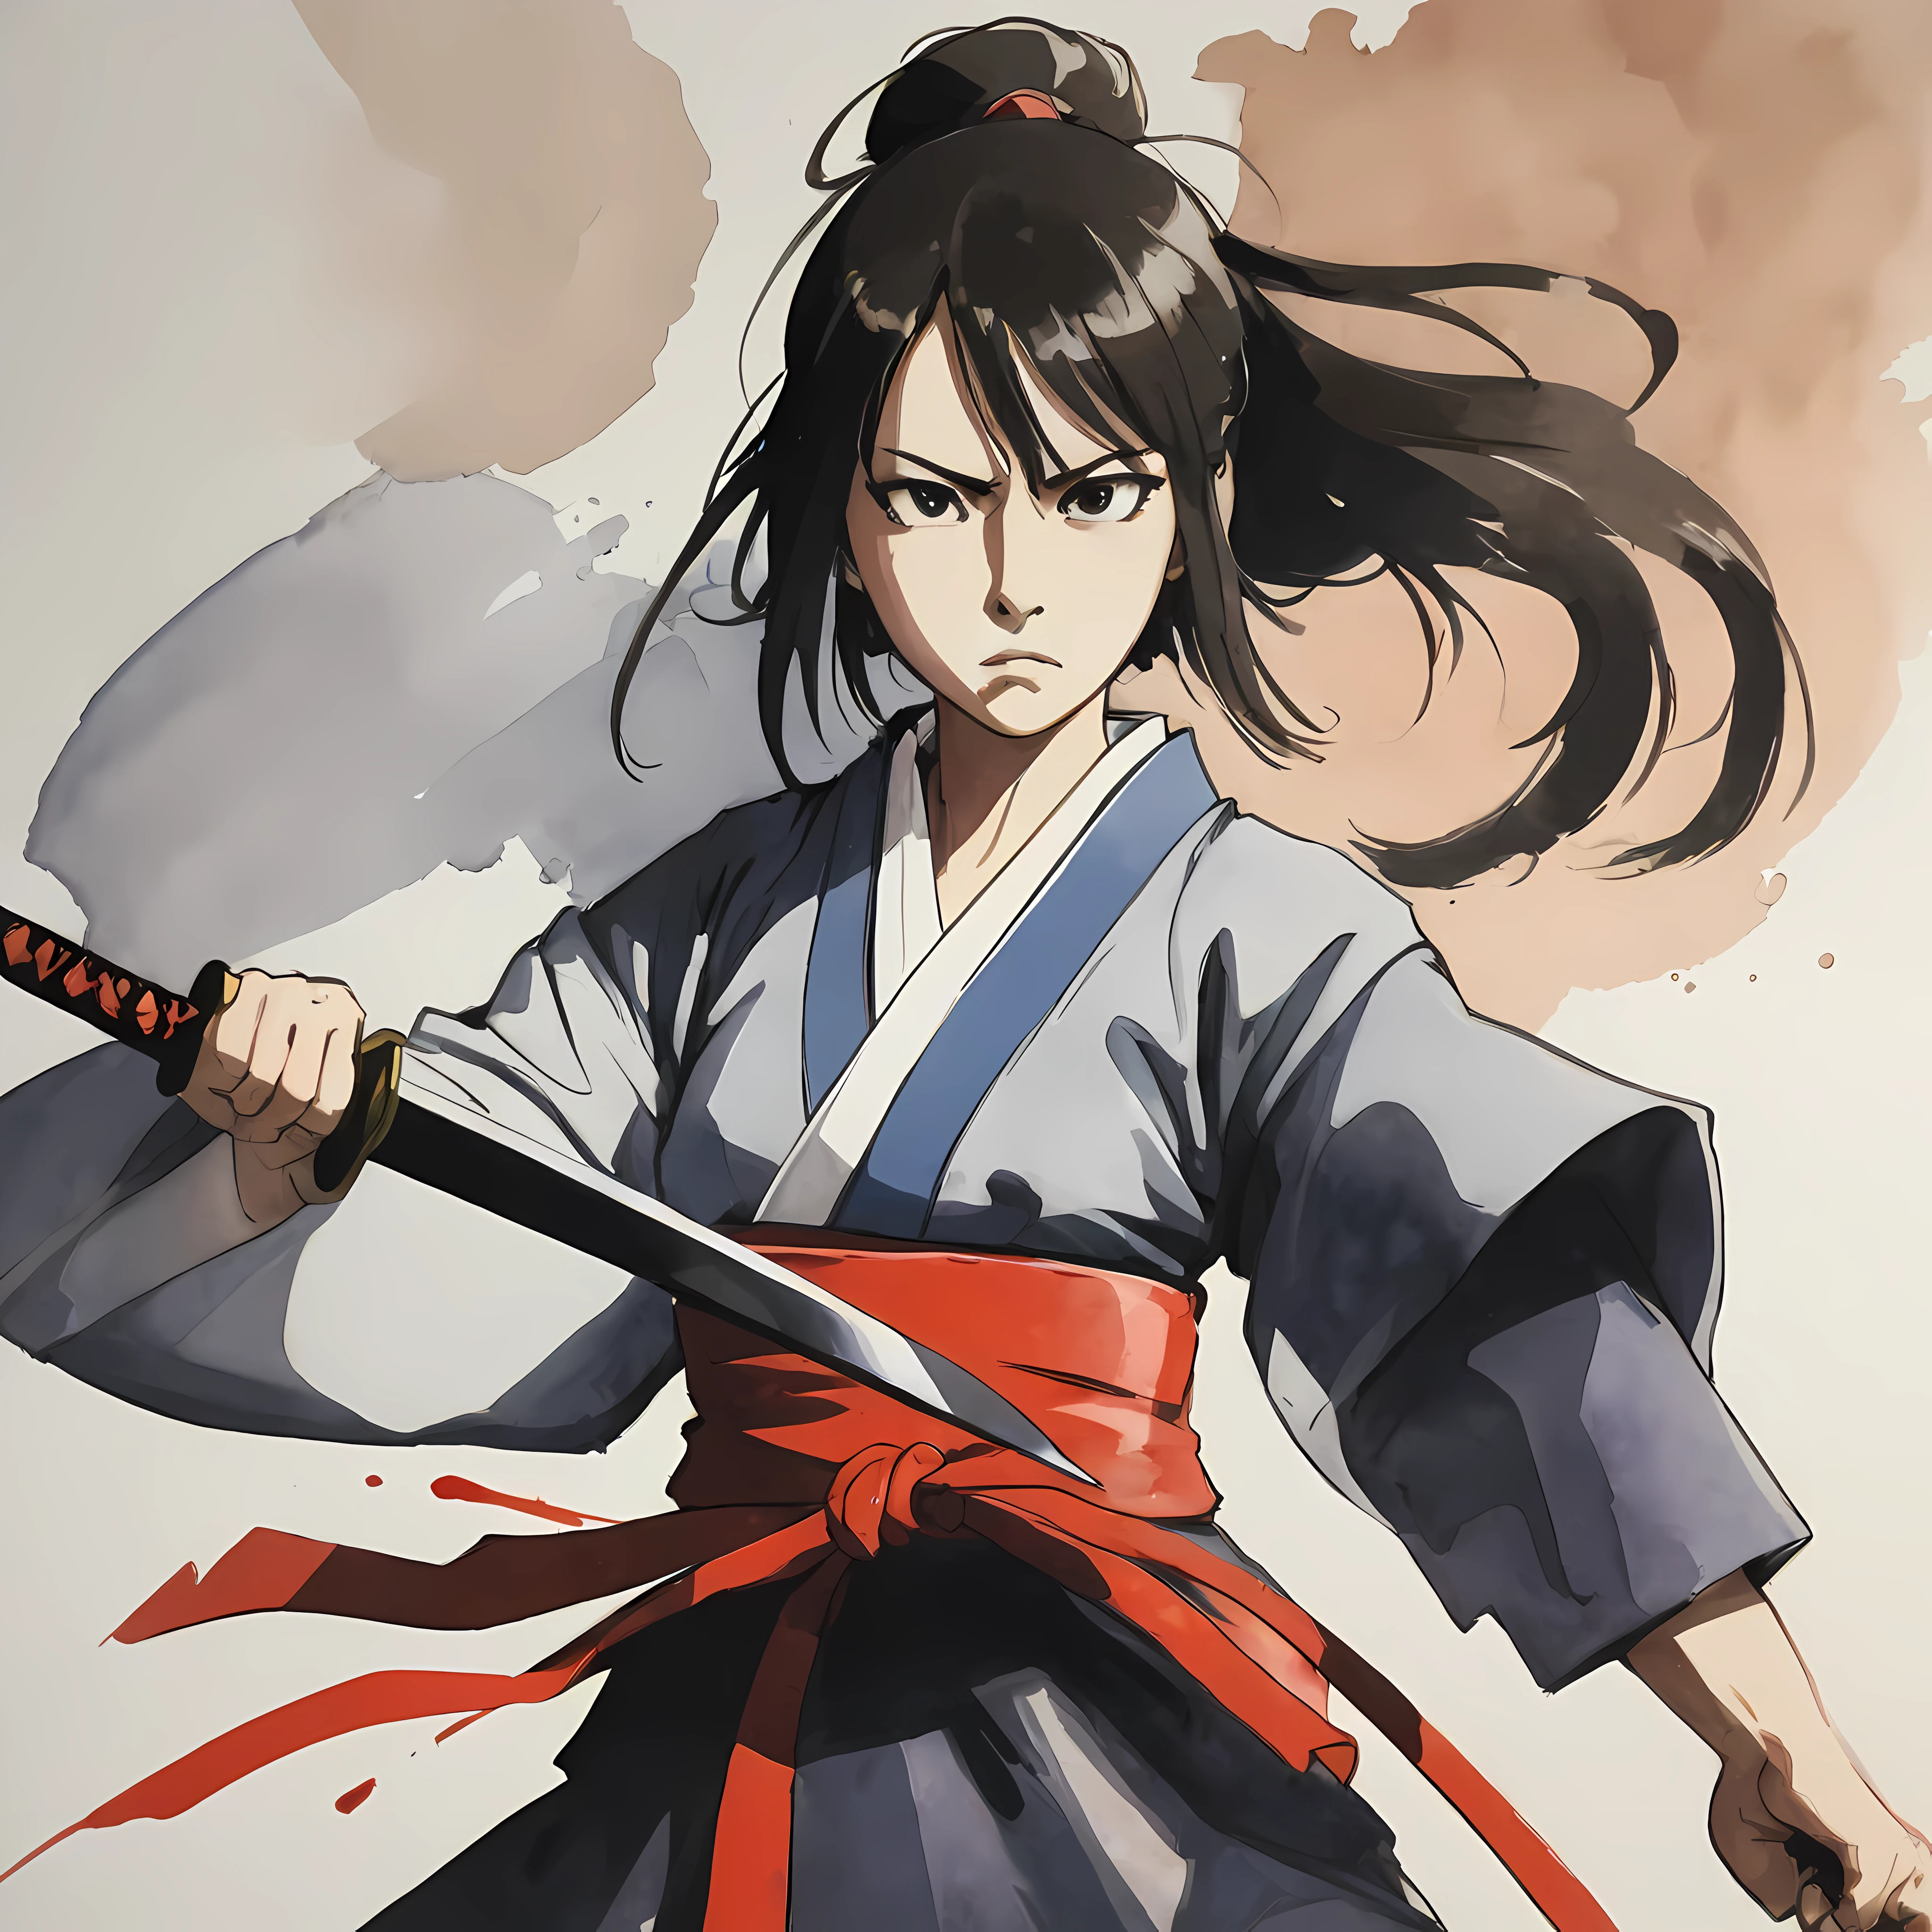 ((Rurouni kenshin anime style:1.3). ((Violent_expression:1.2), ((Female Samurai):1.2), ((Hourglass_figure):1.1). ((fighting stance):1.1), | The figure is depicted with smooth lines, expressing emotions and posture through the contrast of ink density. The background is minimalist, emphasizing light, shadow, and spatial perception.